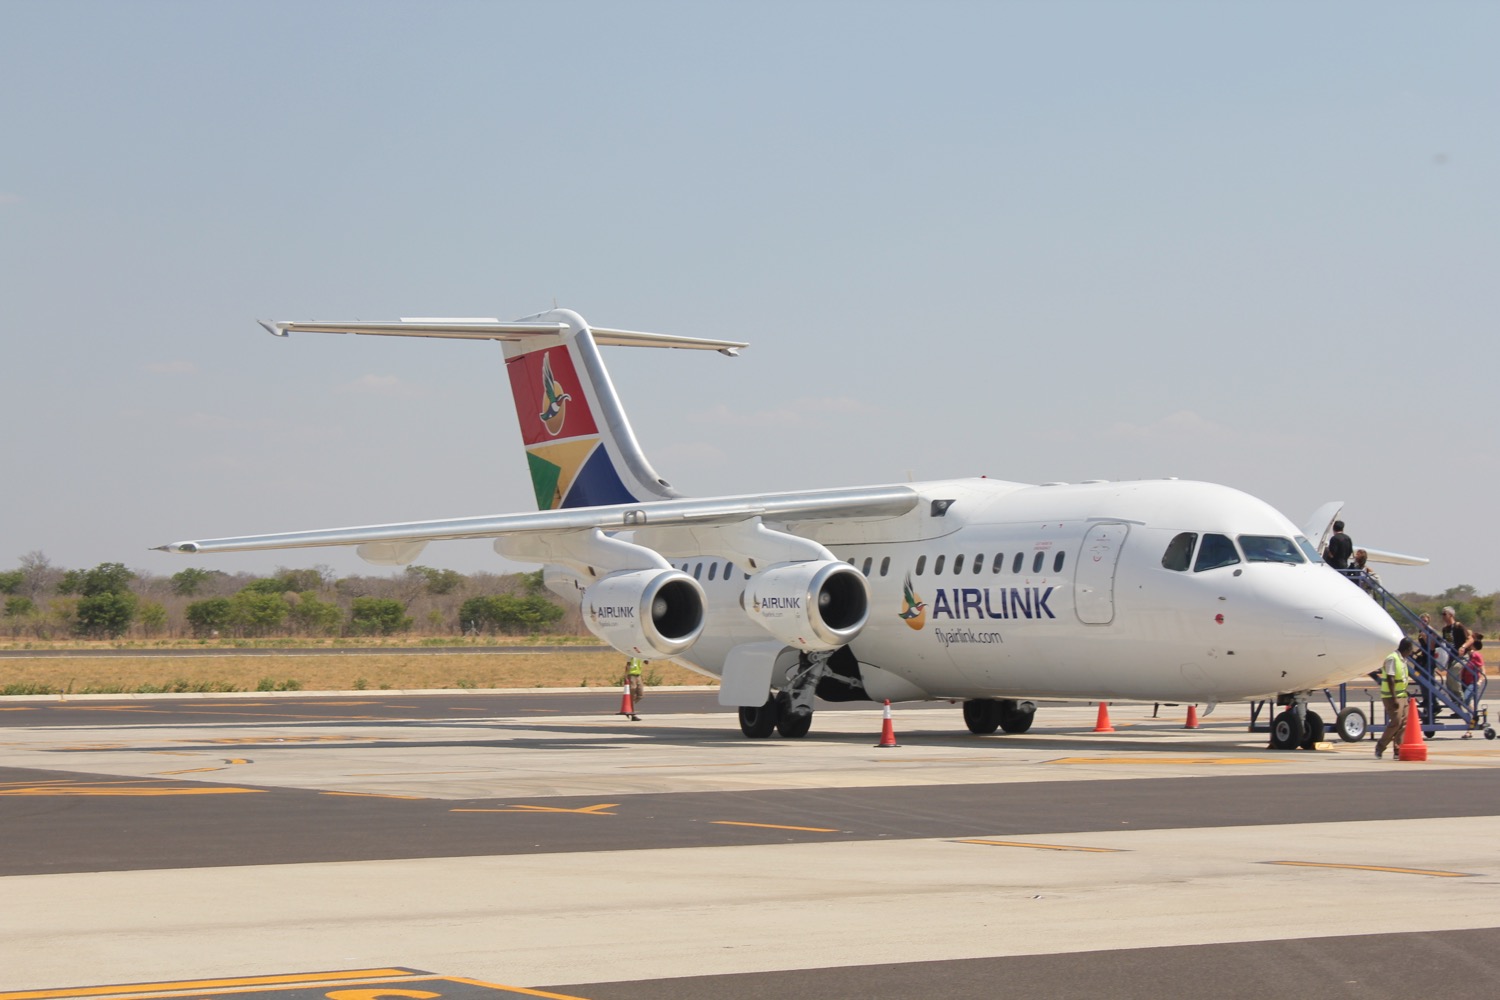 Airlink lands in Victoria Falls